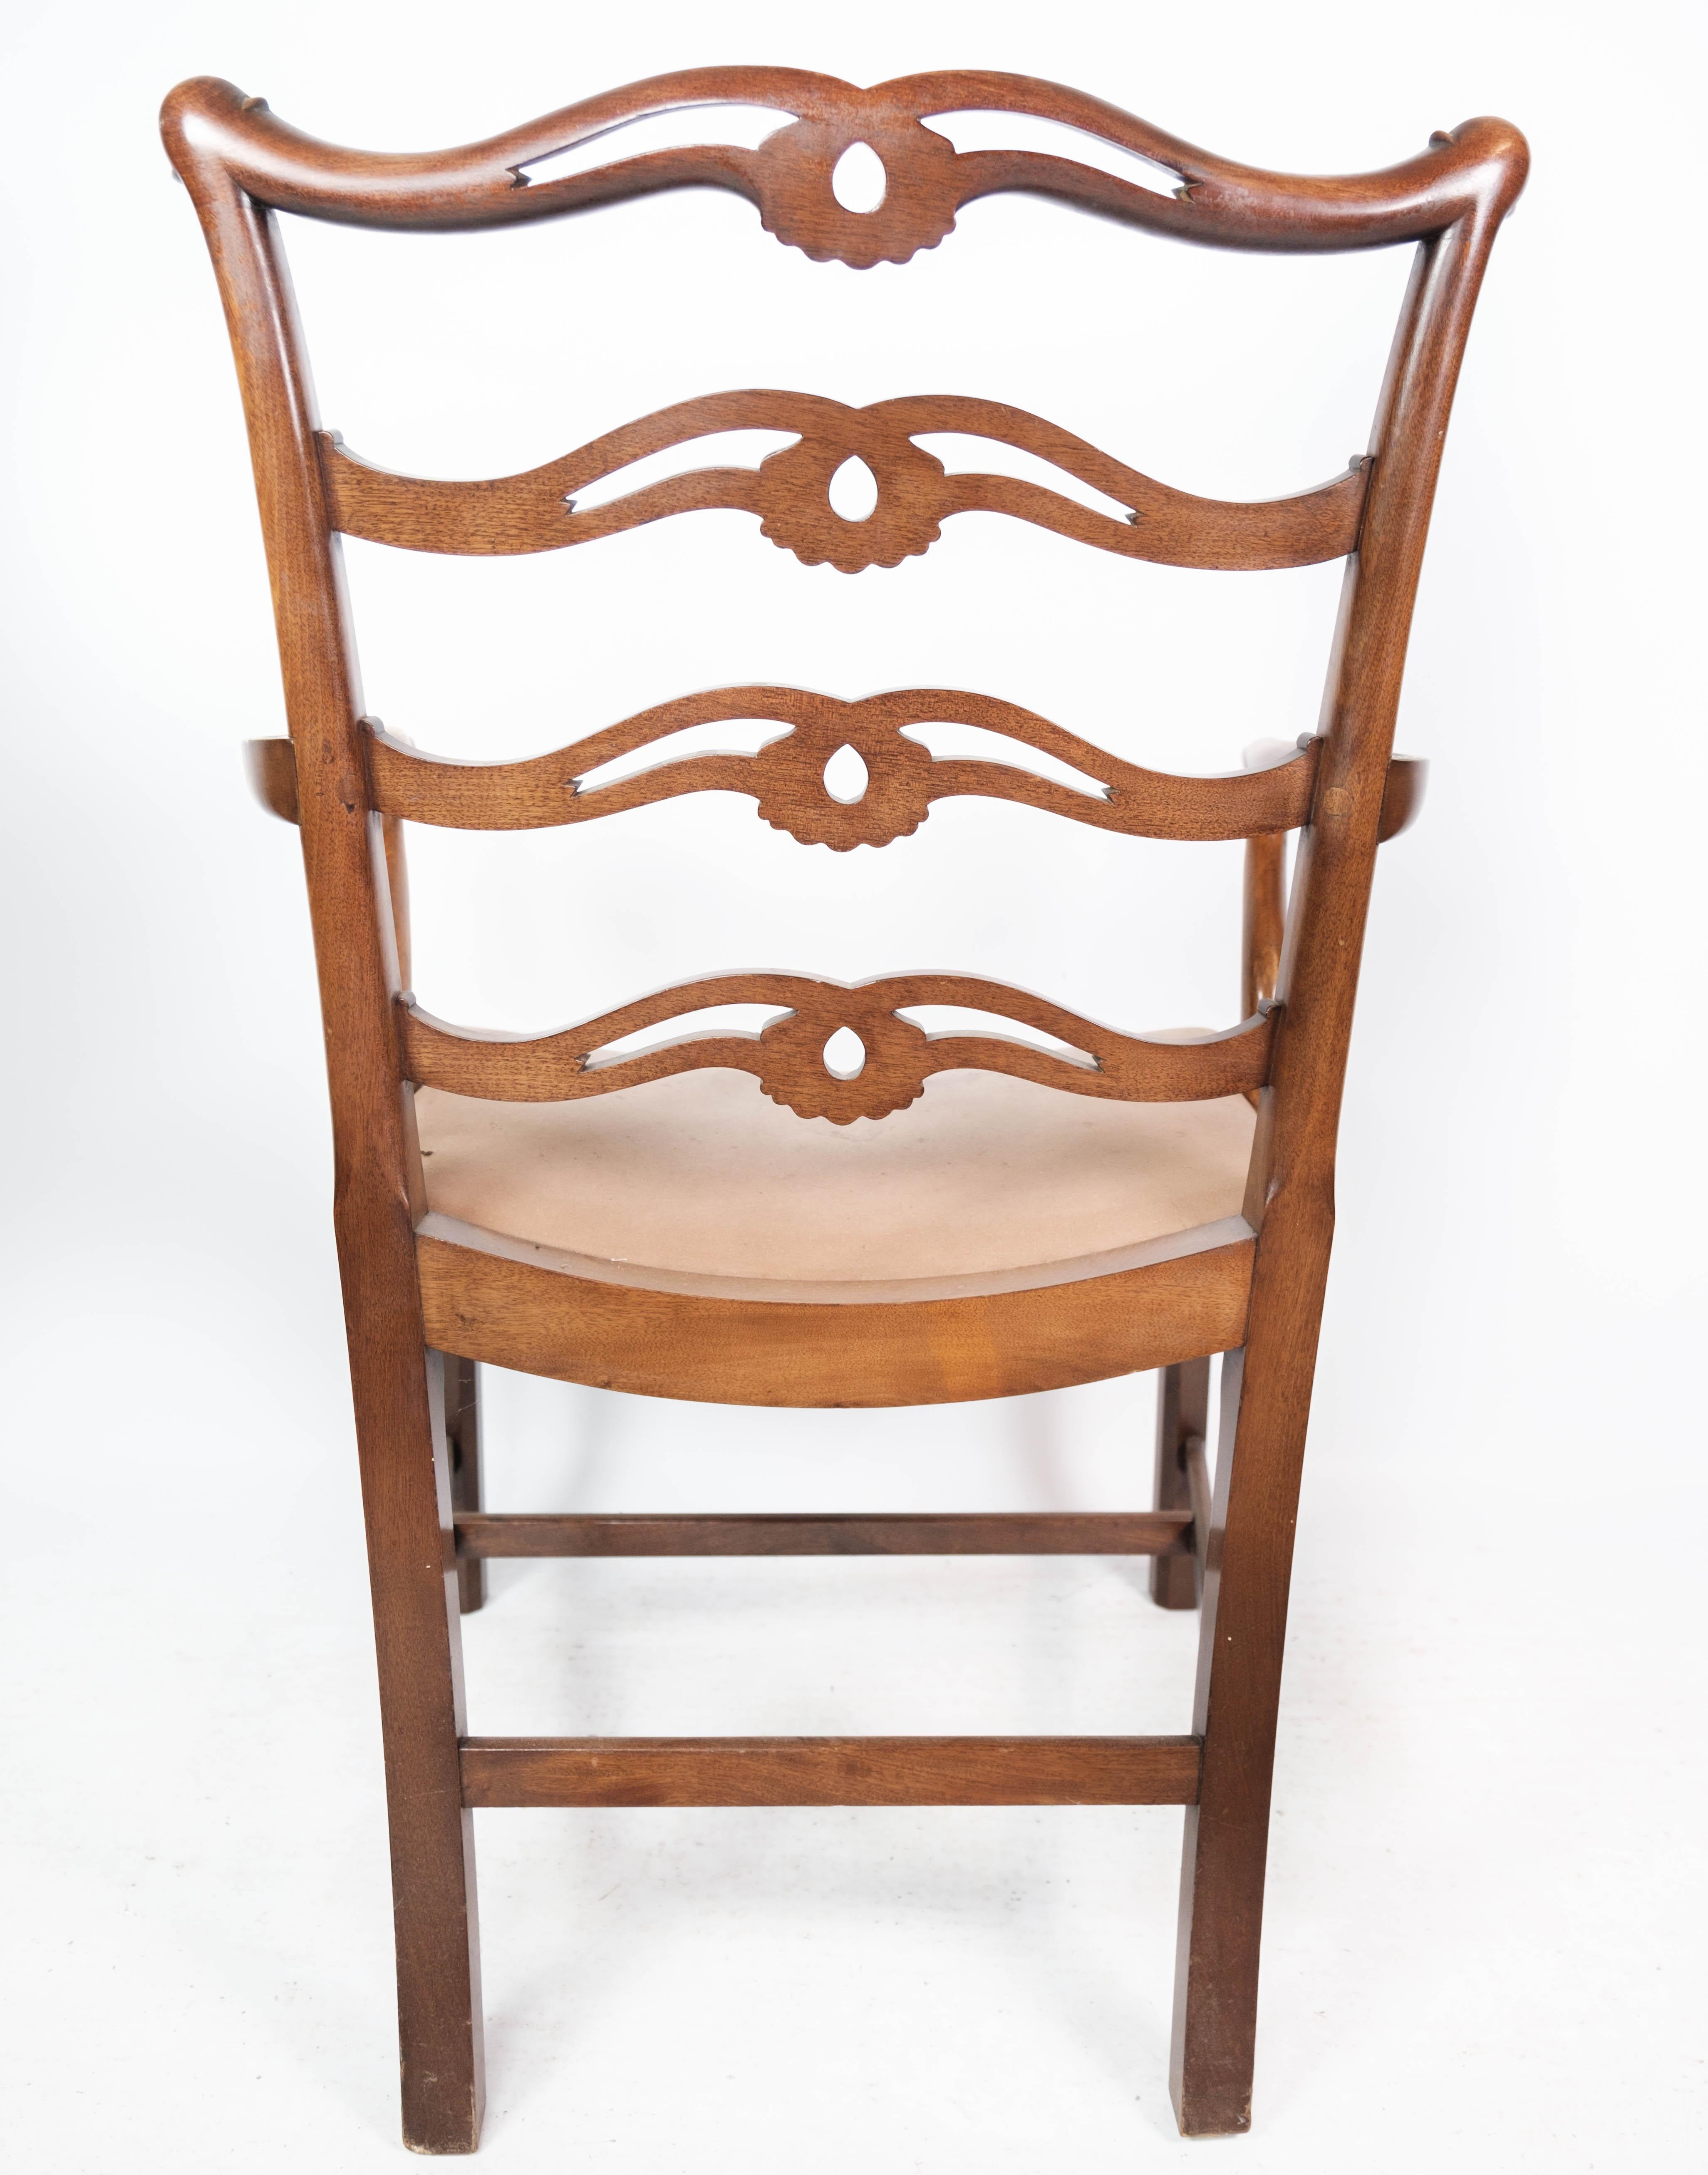 Late 19th Century Antique Armchair of Mahogany and with Original Upholstery of Light Fabric, 1880s